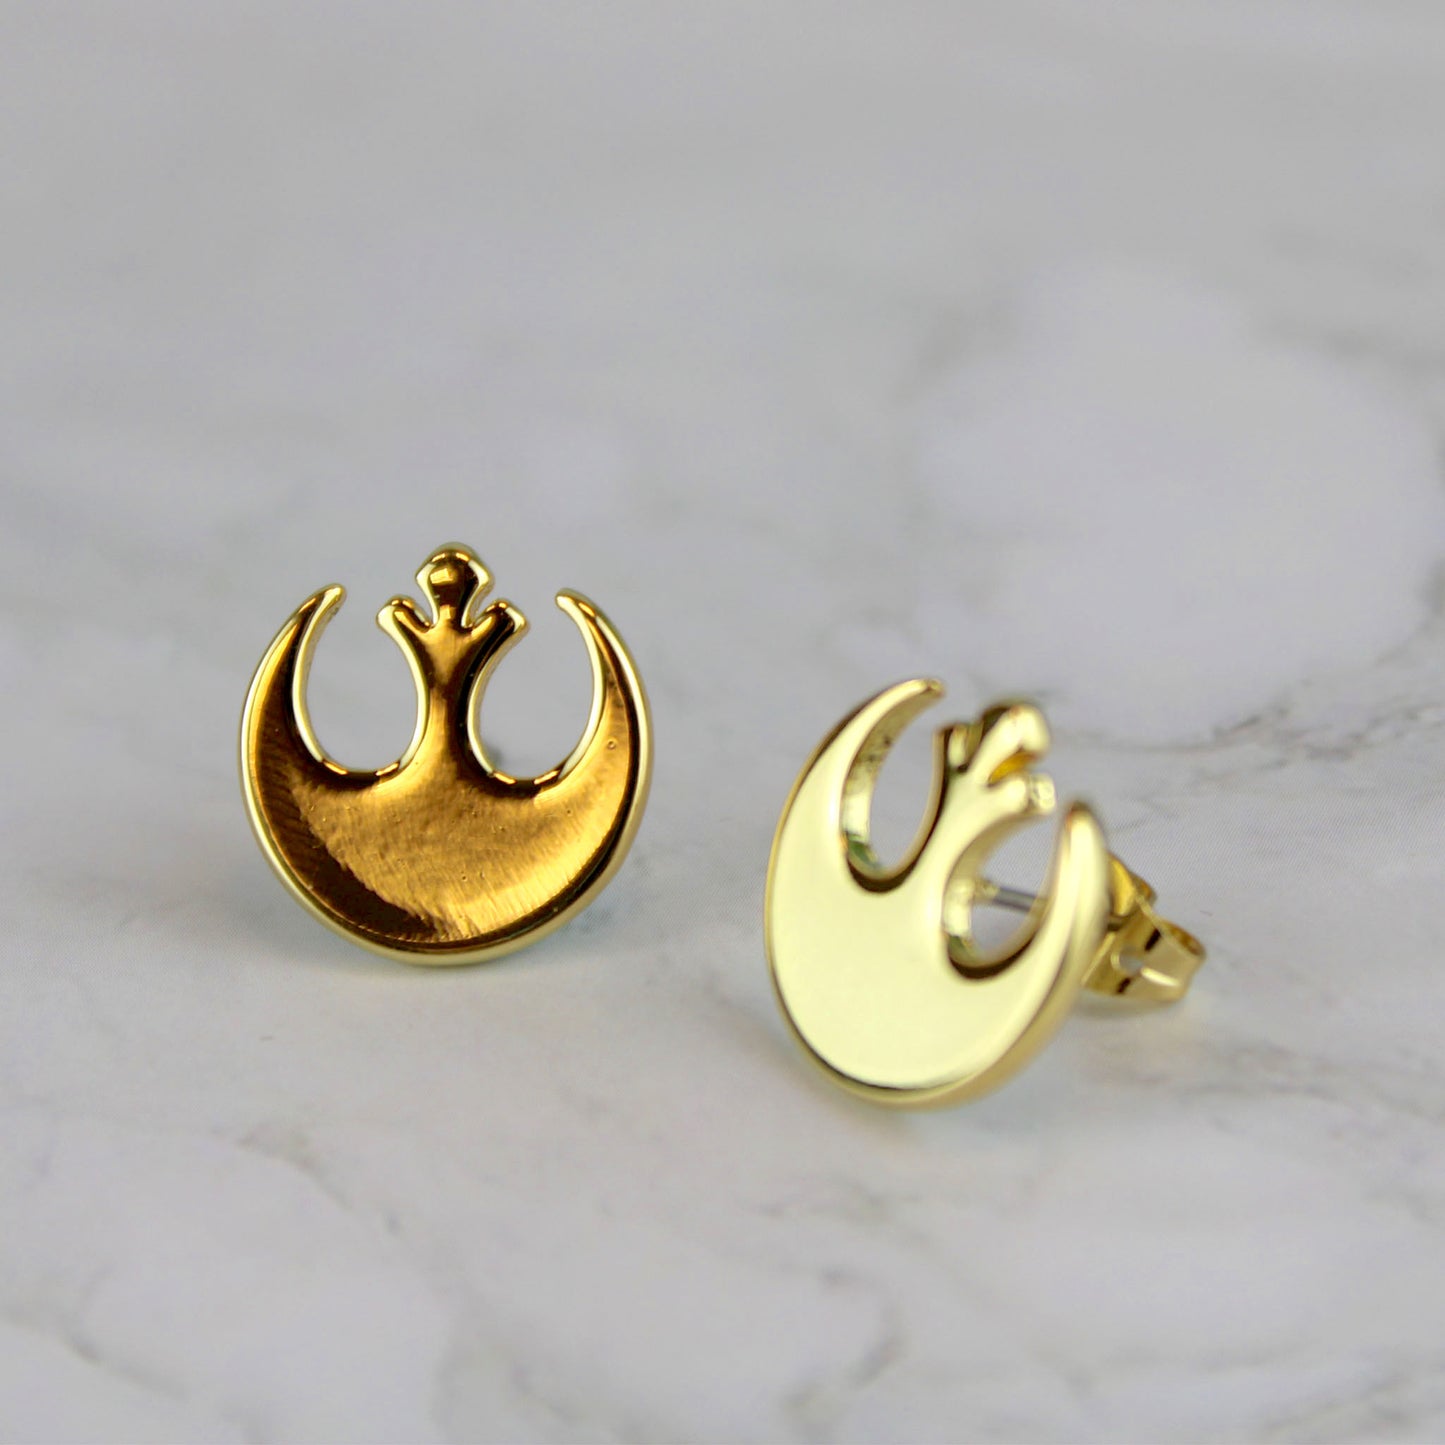 Load image into Gallery viewer, Rebel Alliance (Star Wars) Yellow Gold Plated Stud Earrings
